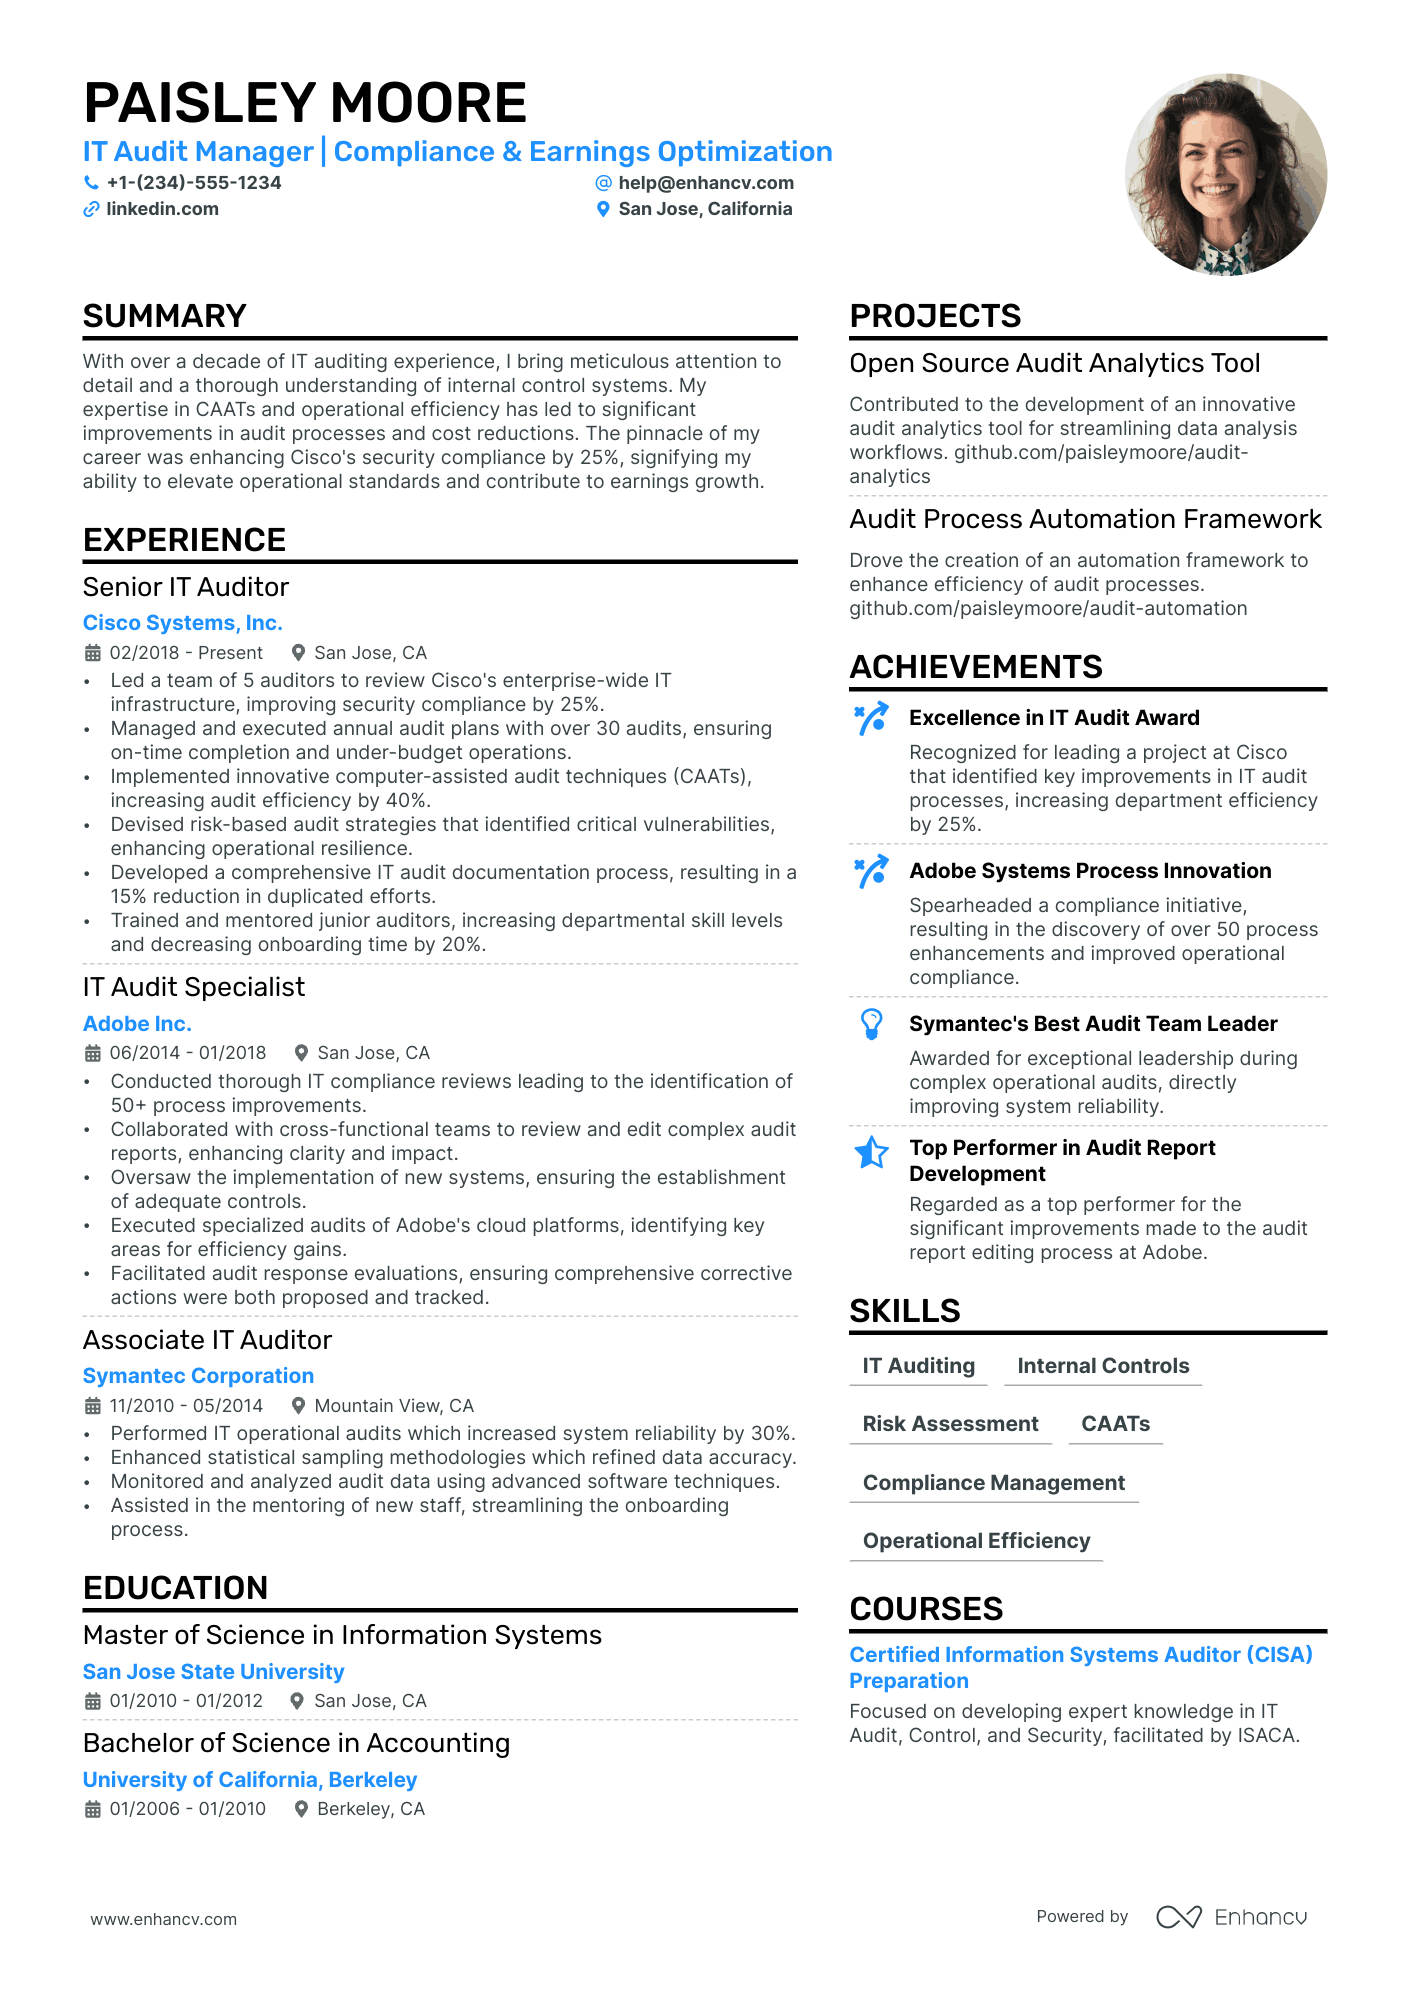 IT Audit Manager resume example